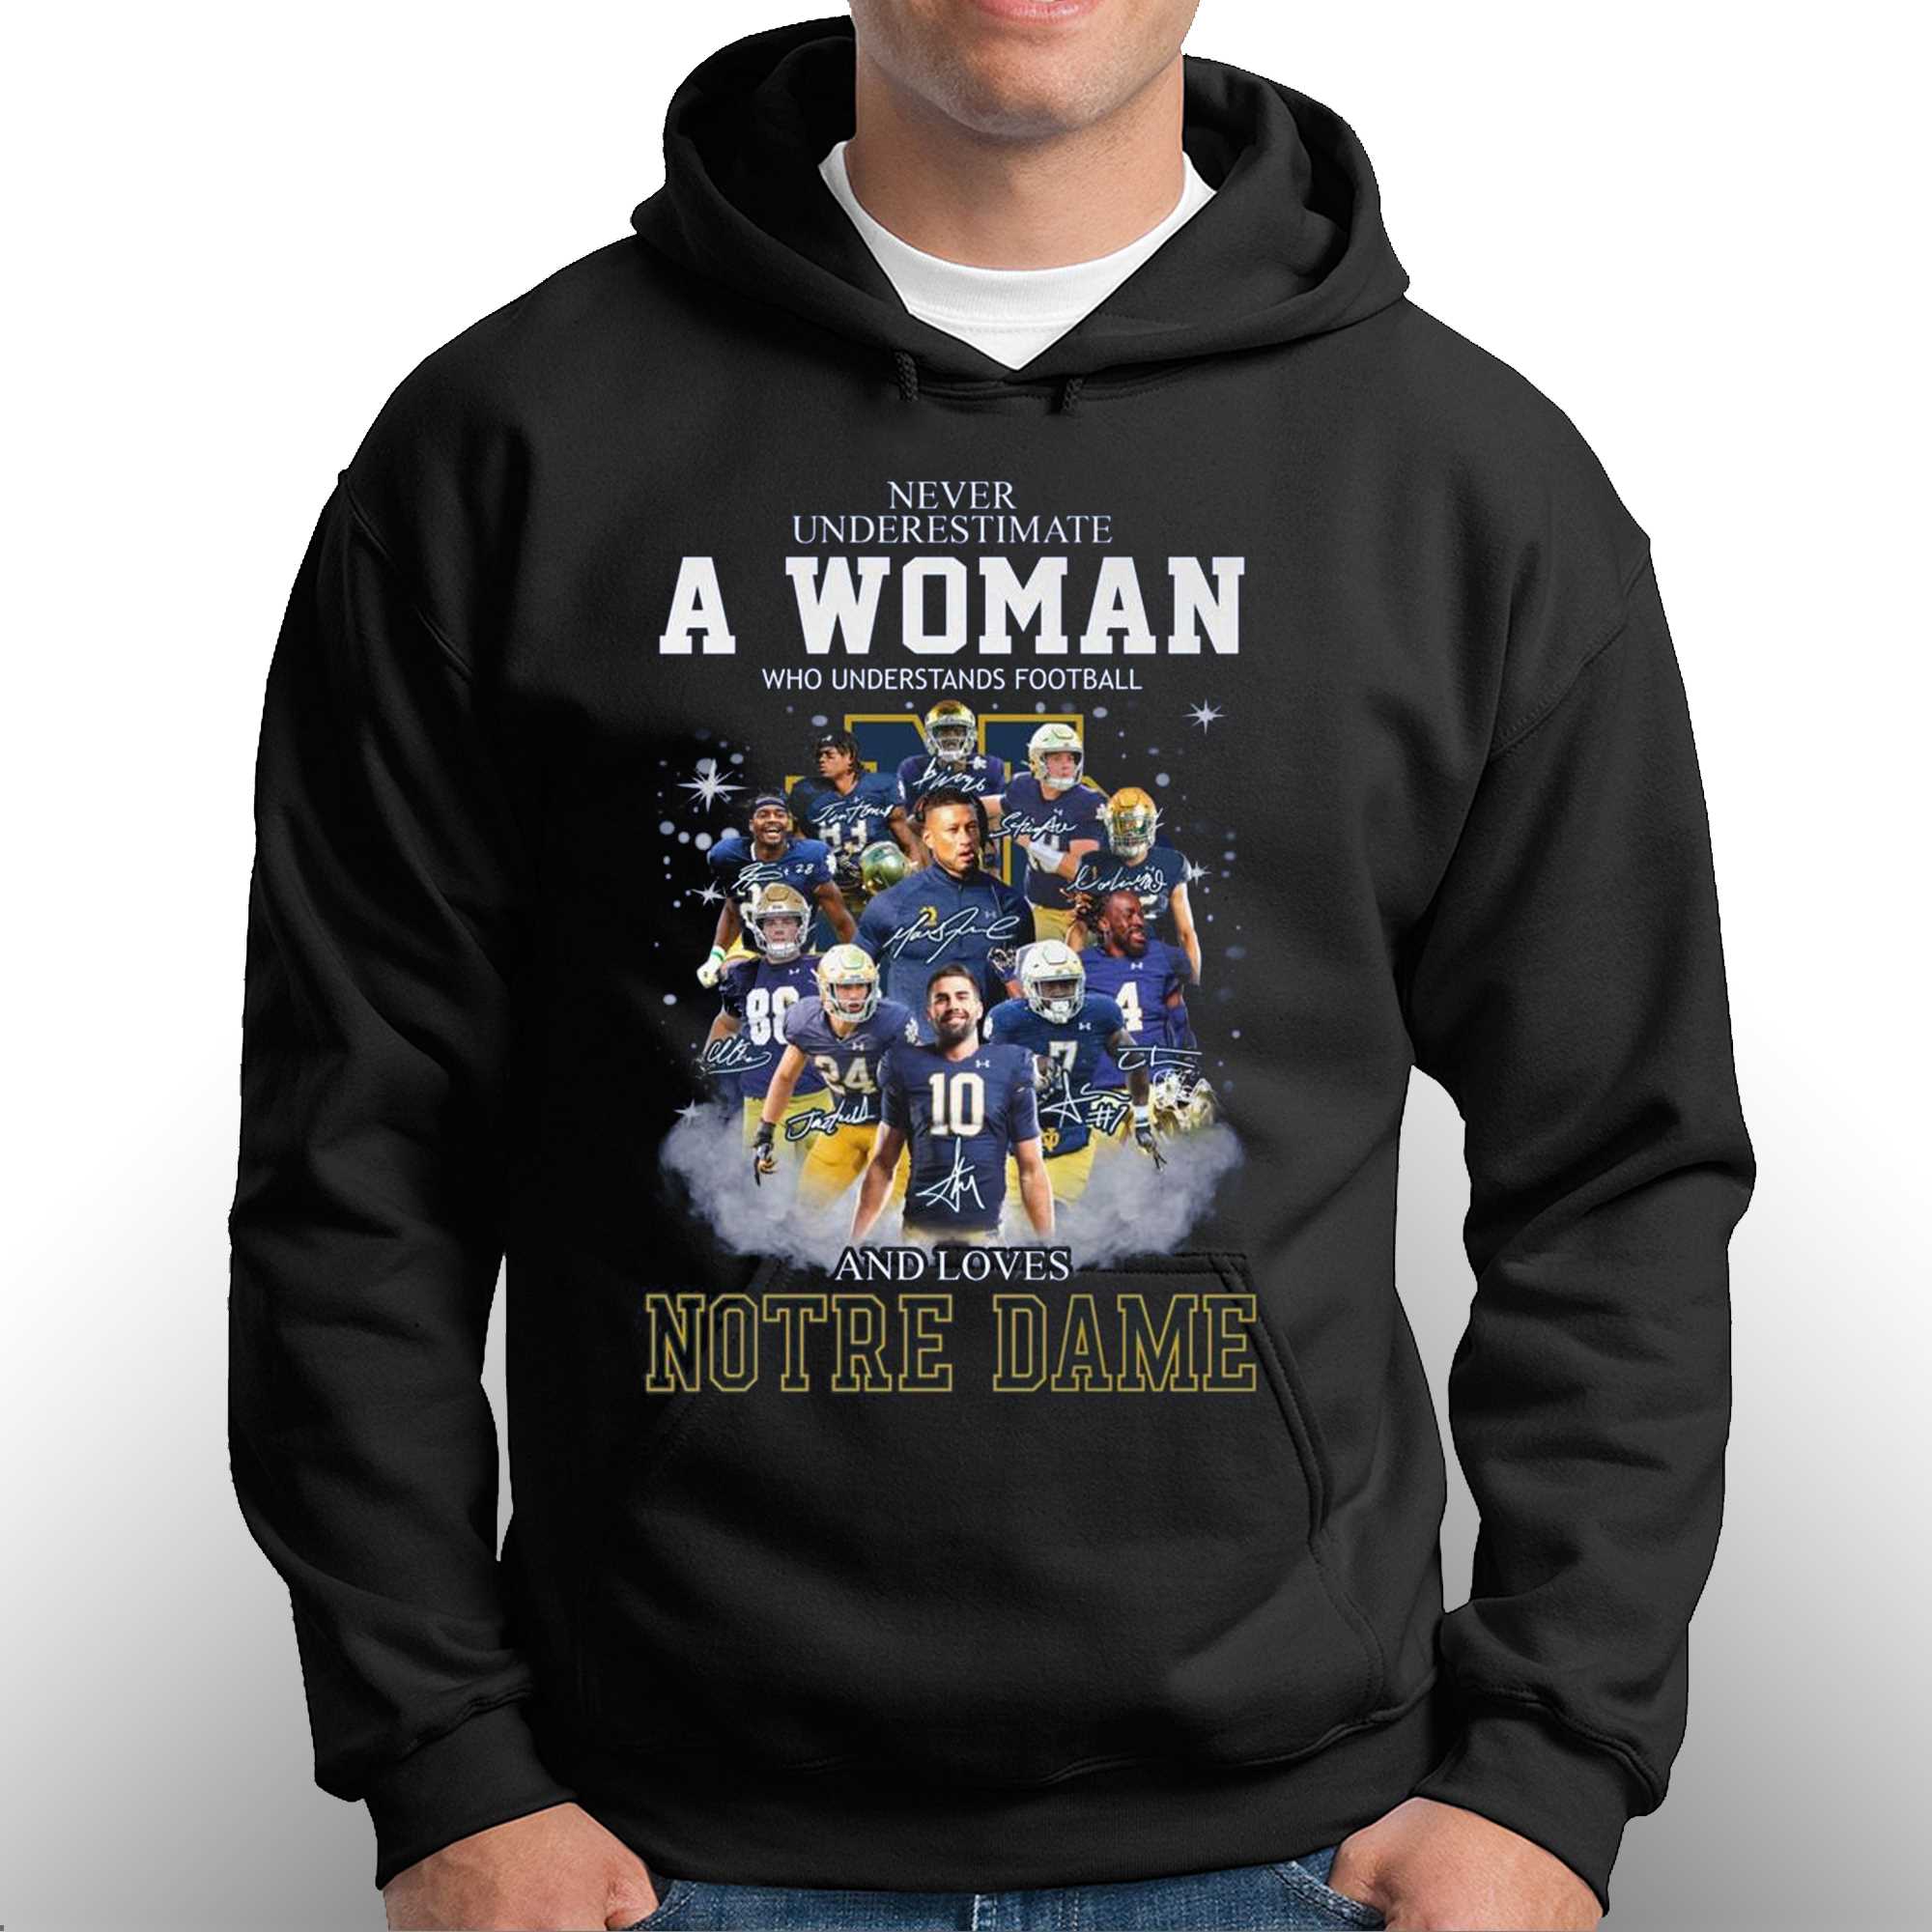 Official Never Underestimate A Woman Who Understands Football And Loves Louisville  Cardinals Best Players Team Shirt - teejeep